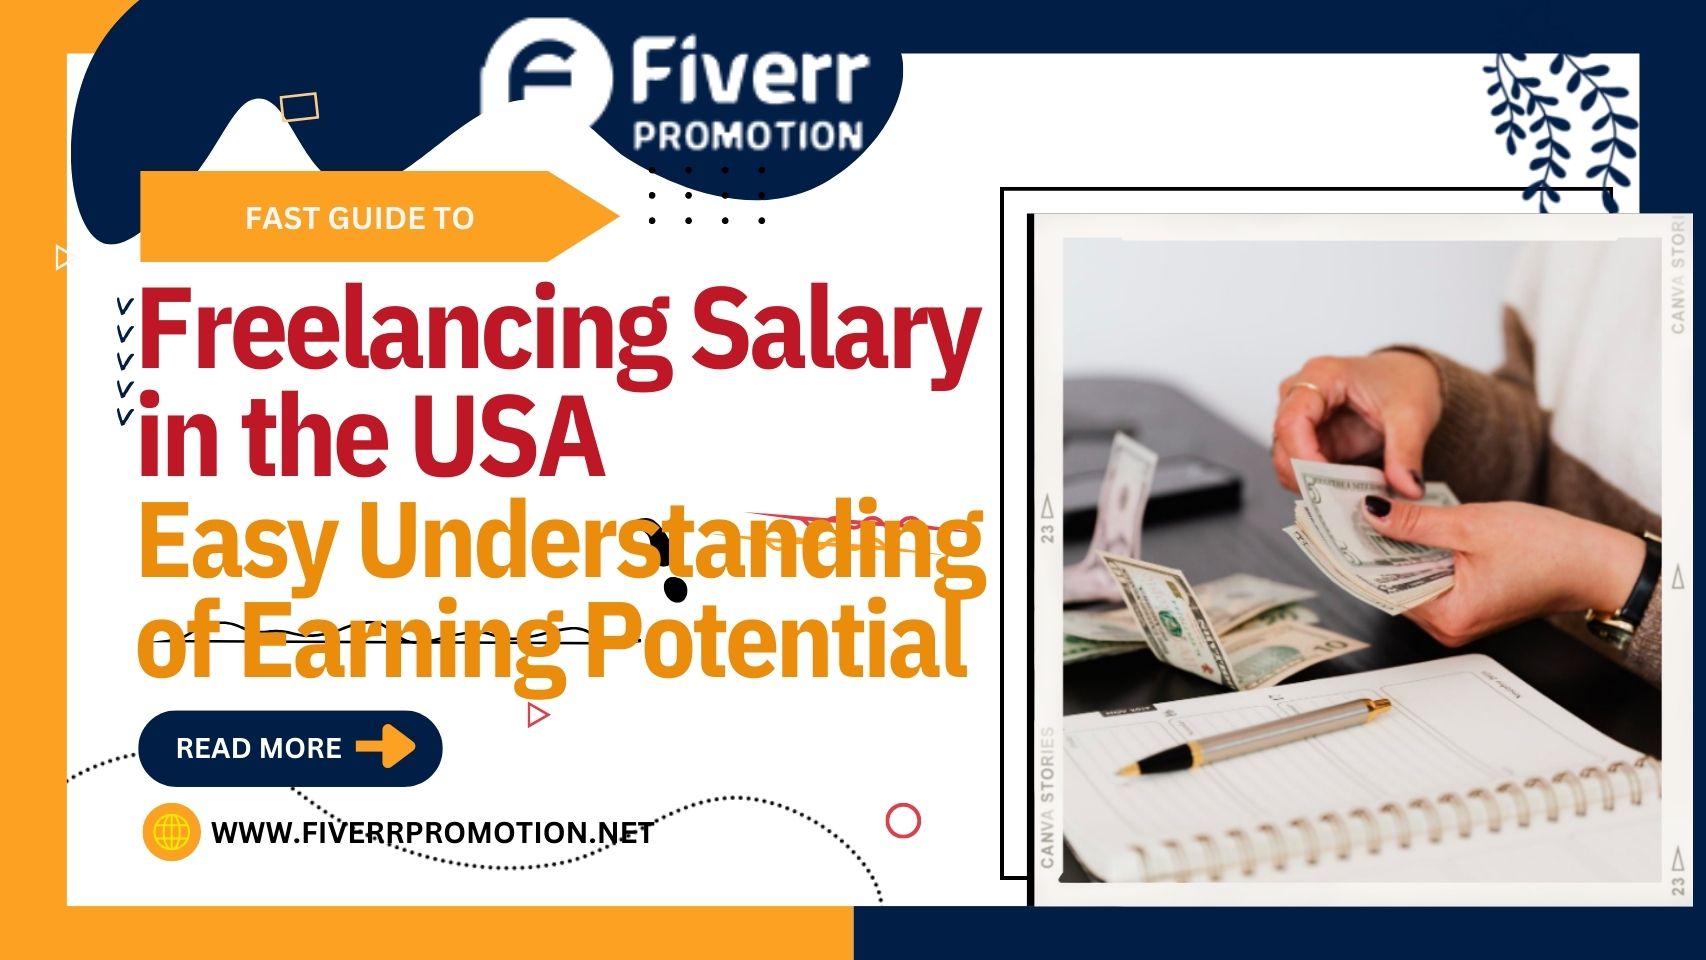 Fast Guide to Freelancing Salary in the USA: Easy Understanding of Earning Potential